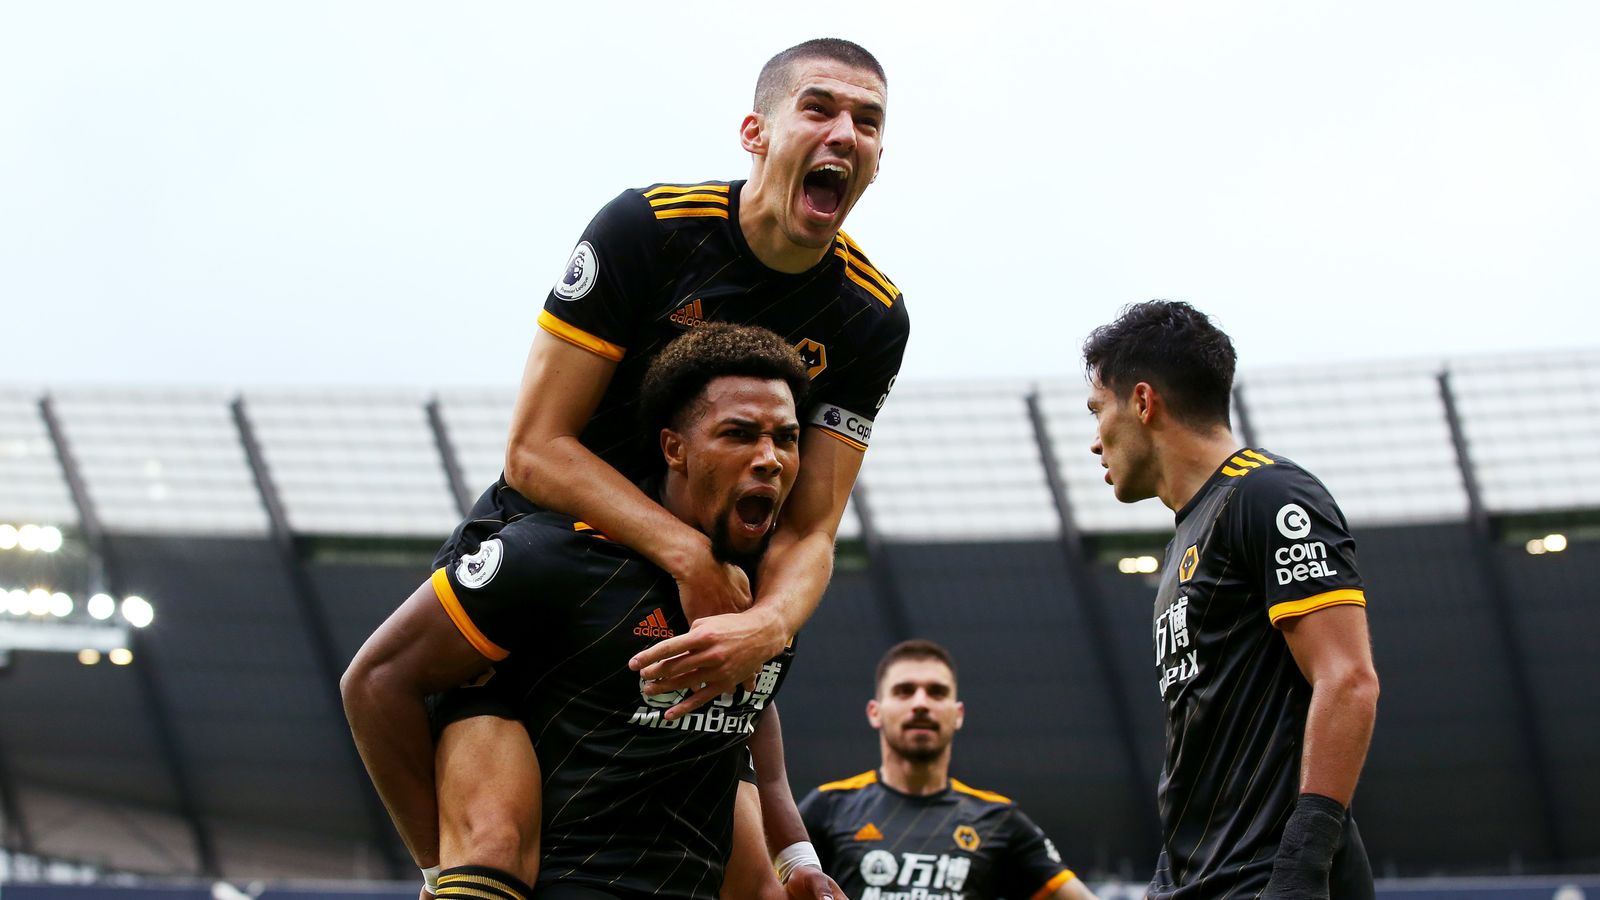 Match Preview - Wolves vs So'ton | 19 Oct 2019